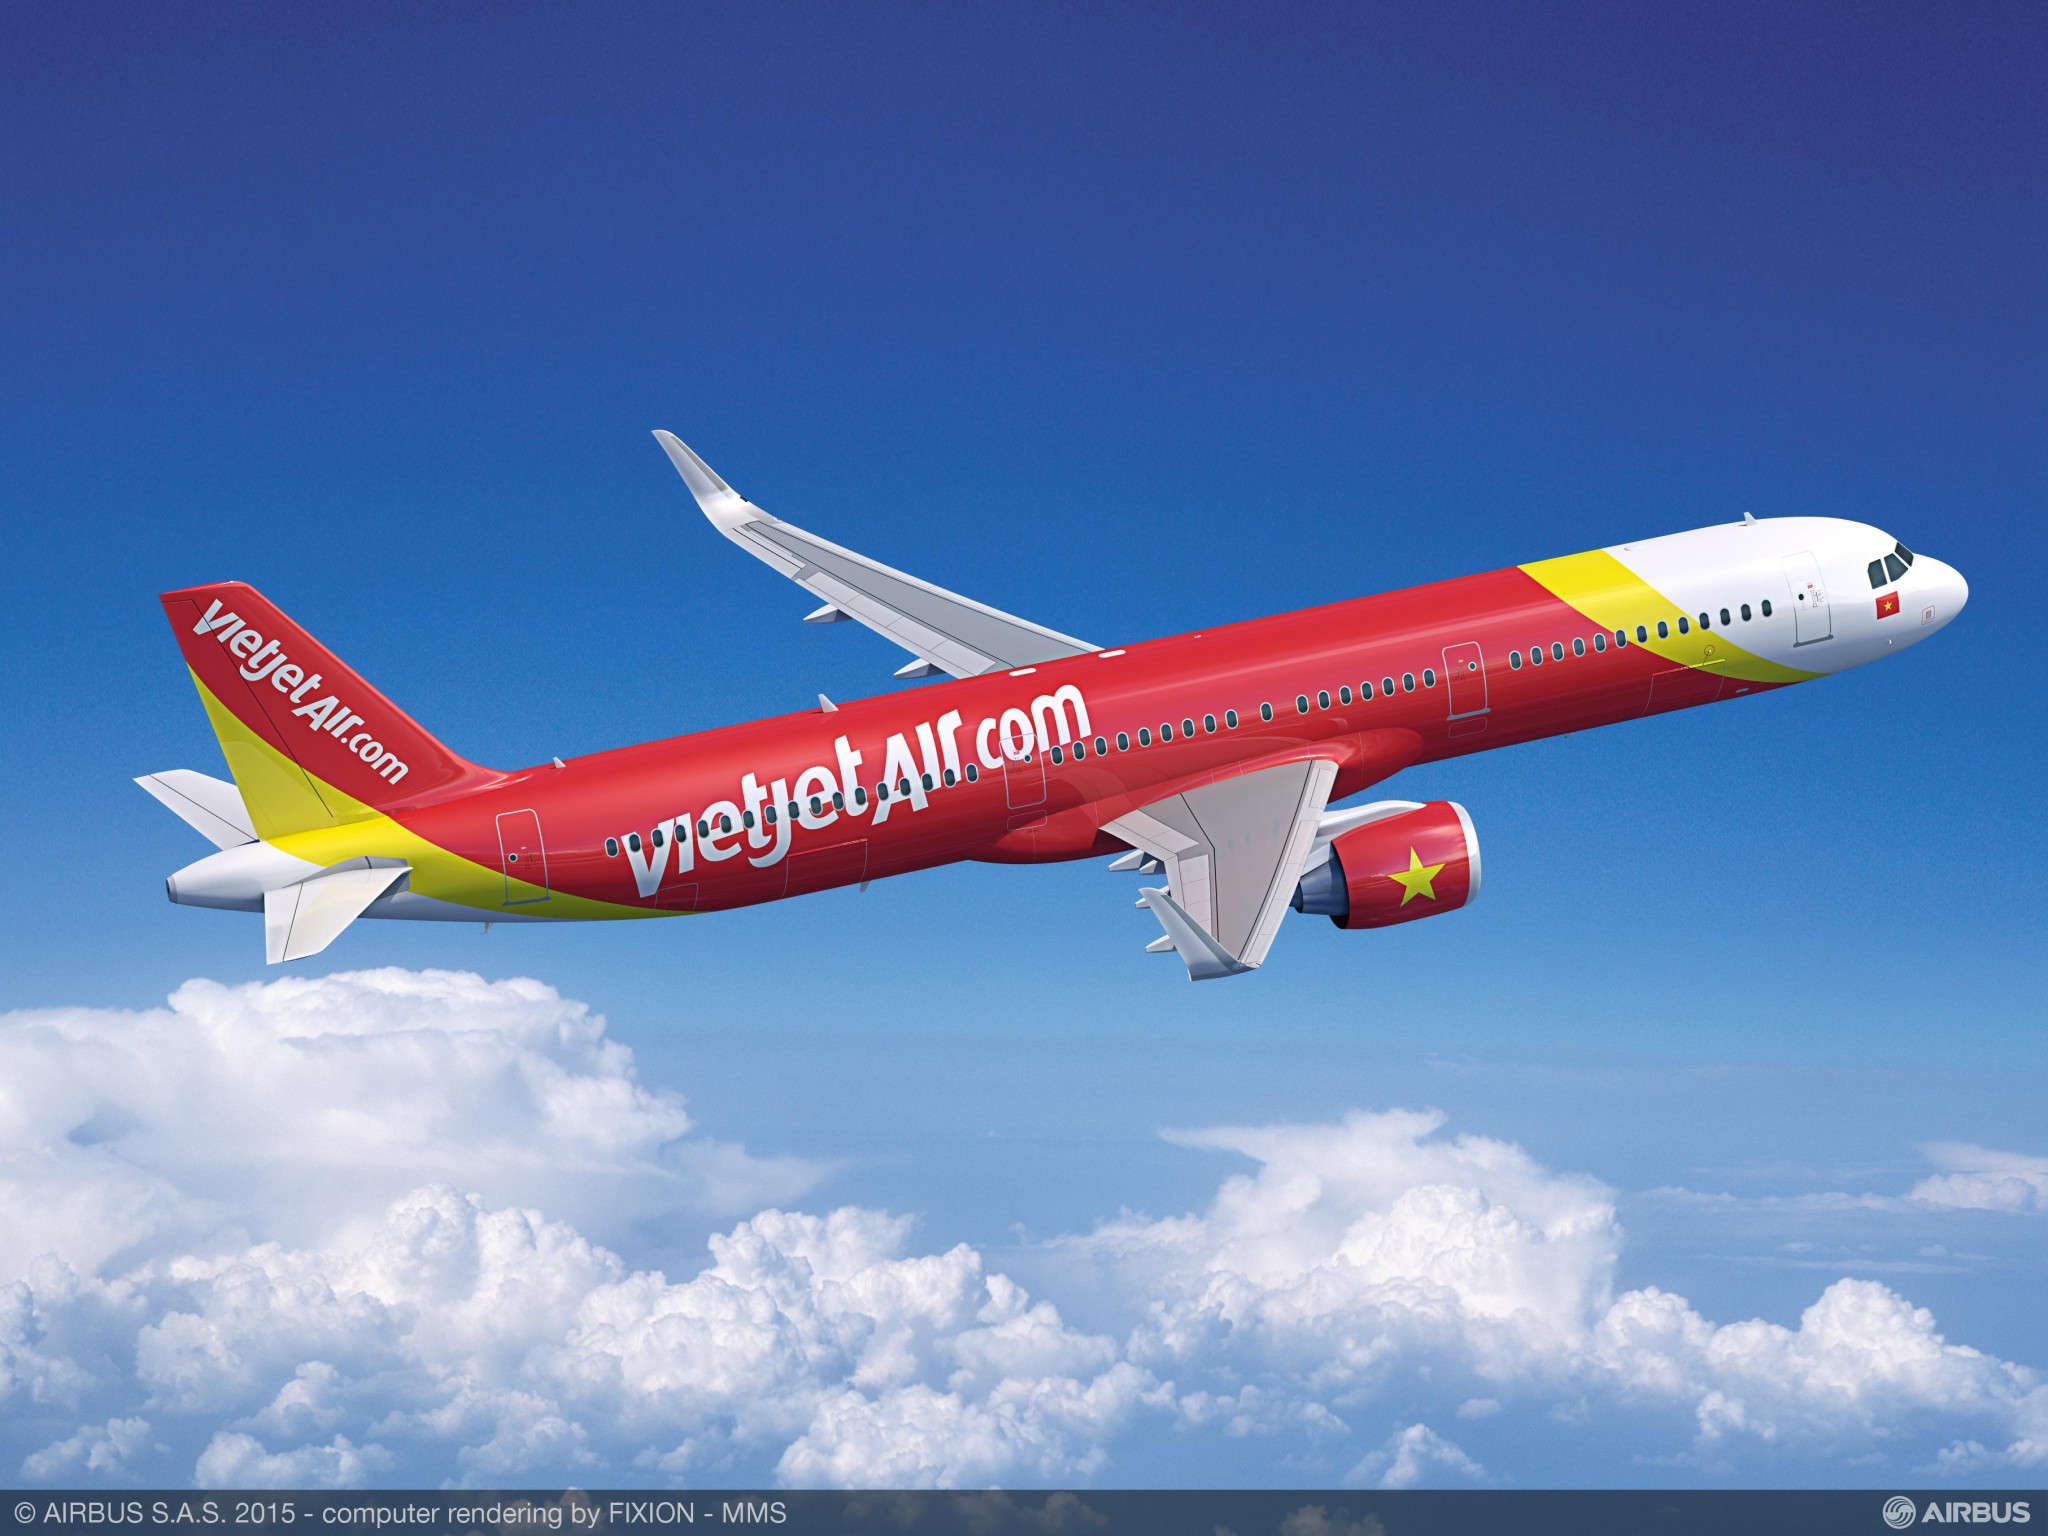 Vietjet to offer dividend payouts at the rate of 60%